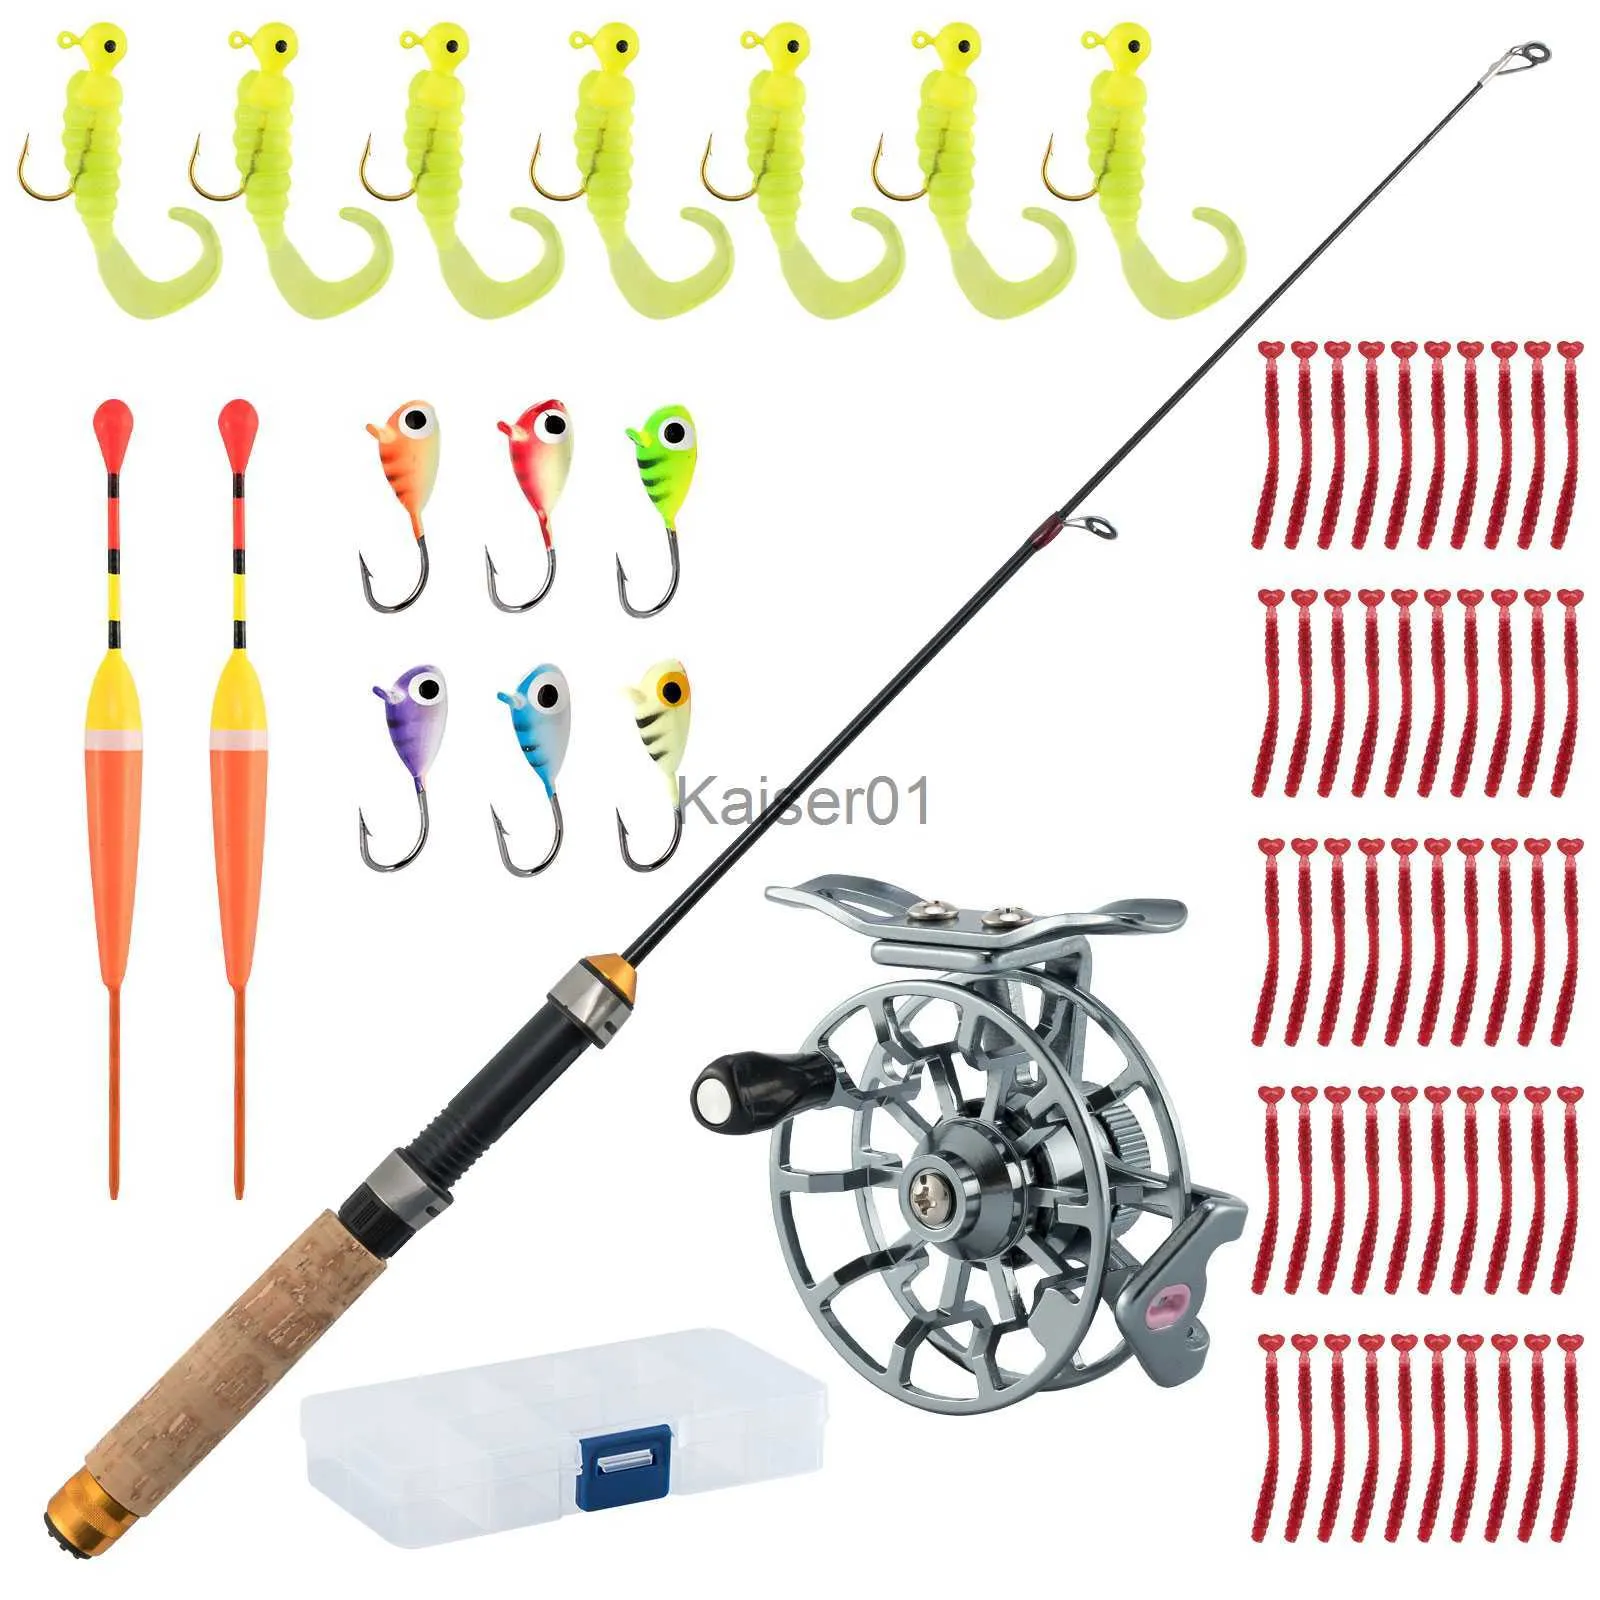 Rod Reel Combo Ice Fishing Rod And Reel Combo Inline Ice Fishing Reel 2.1FT  Ice Fishing Rod Jigs Bobber Soft Plastic Worm Grub Lures Jig Head X0901  From Kaiser01, $26.91